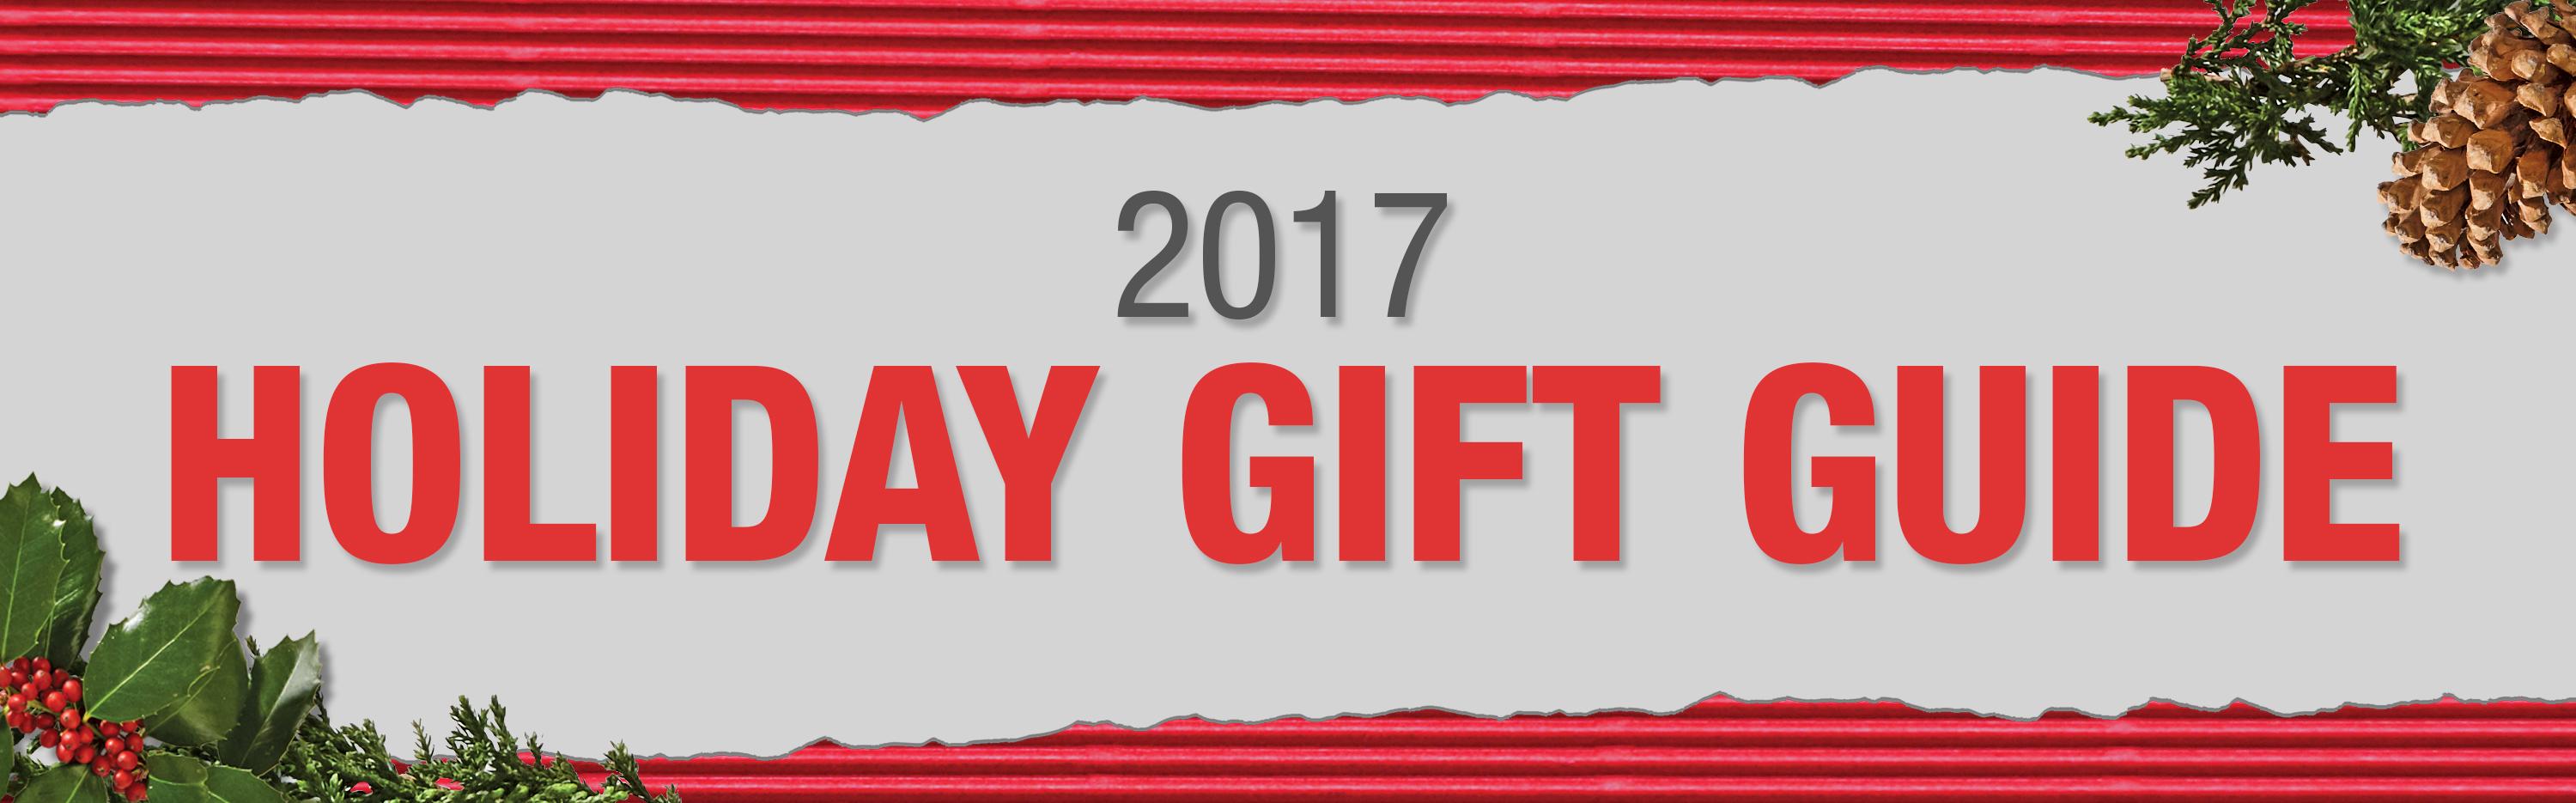 Home Depot Holiday Gift Guide 2017